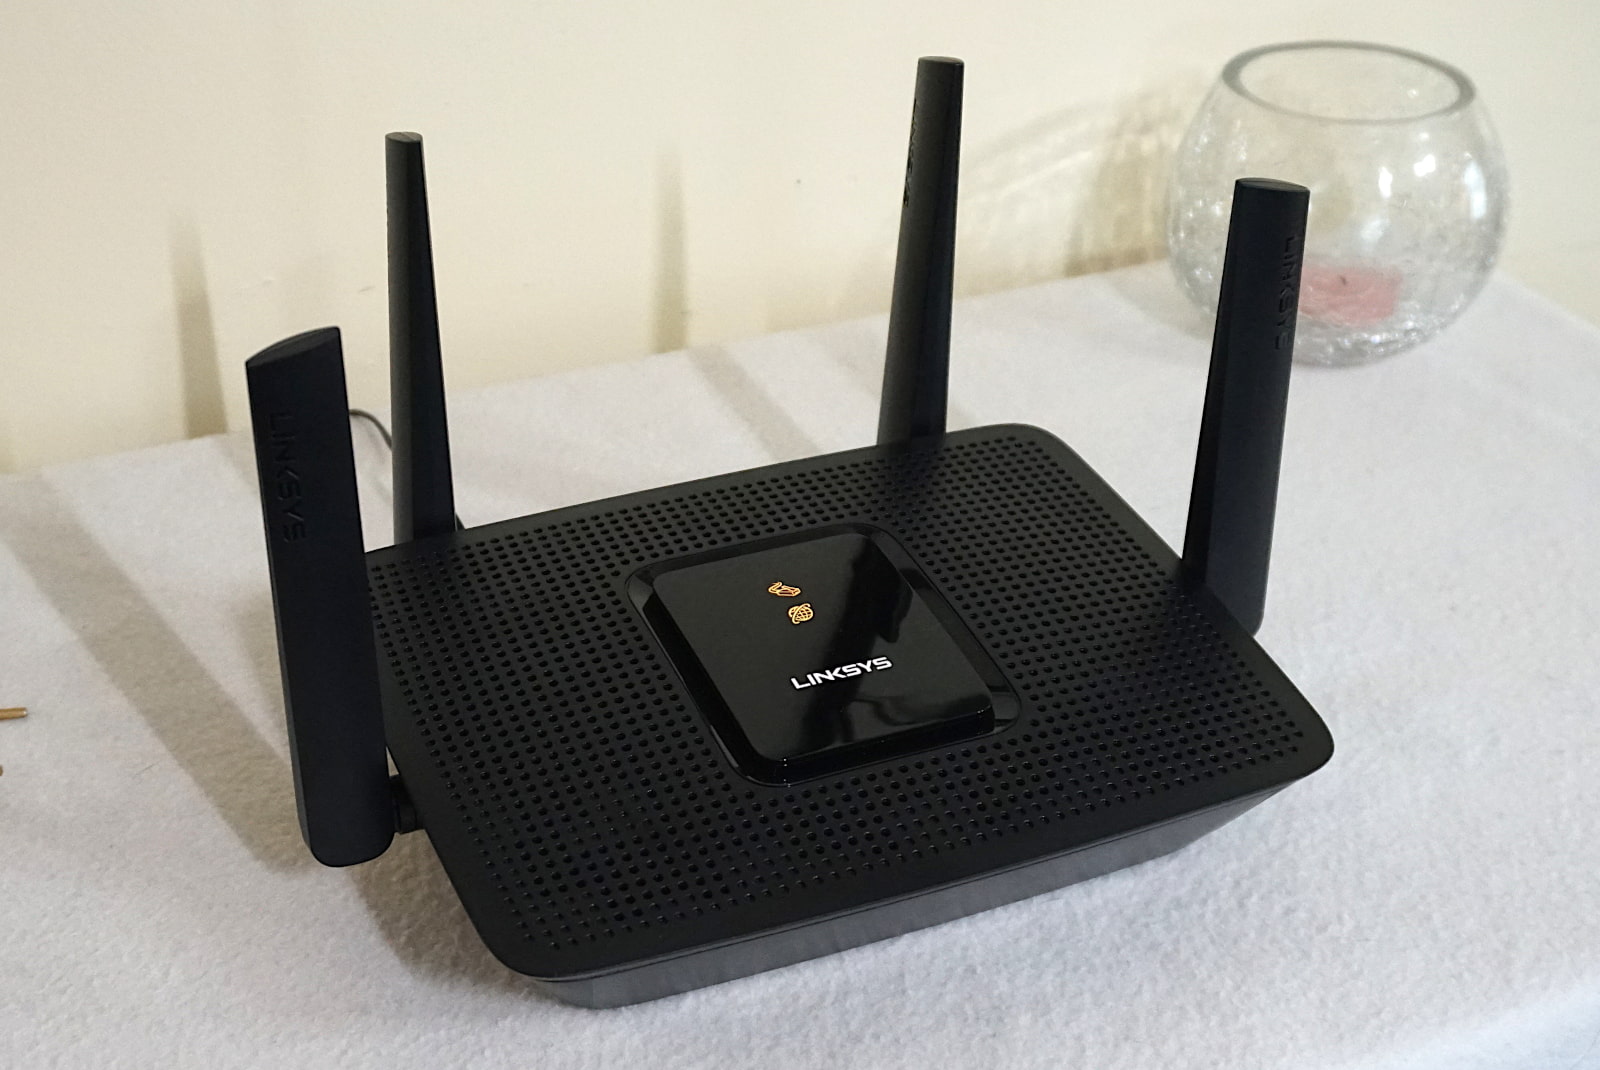 Linksys EA8300 router from above